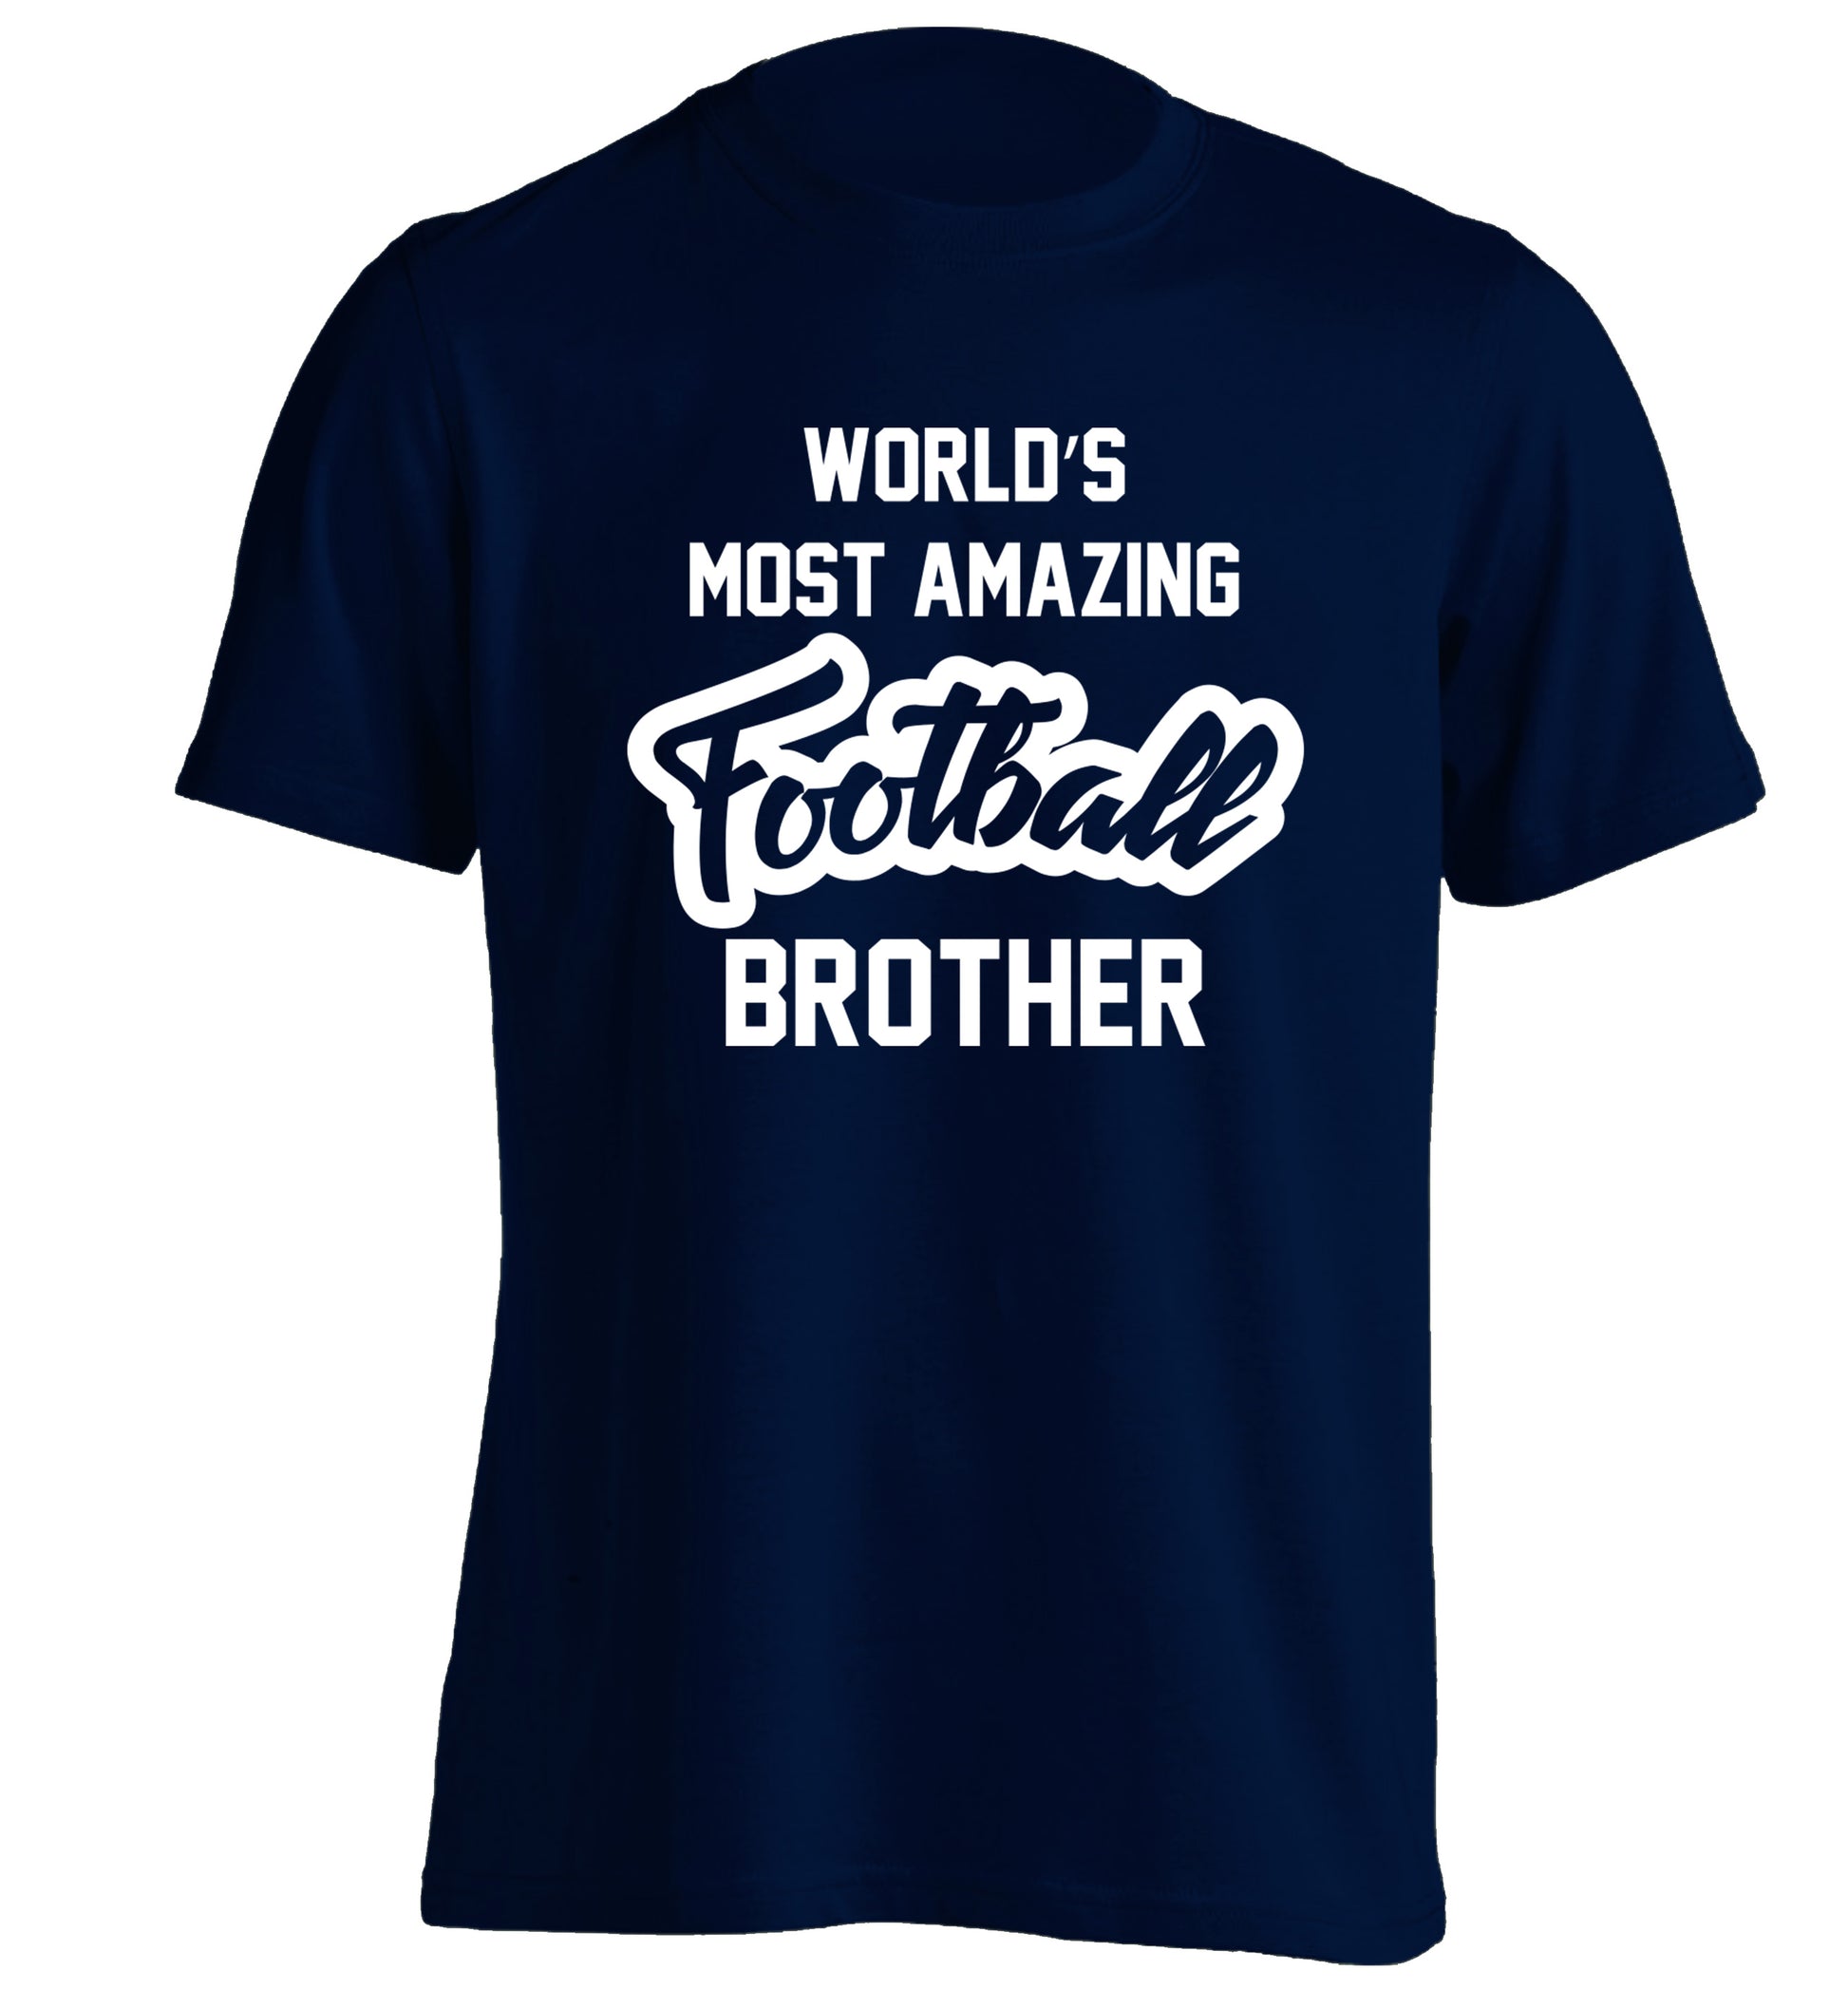 Worlds most amazing football brother adults unisexnavy Tshirt 2XL